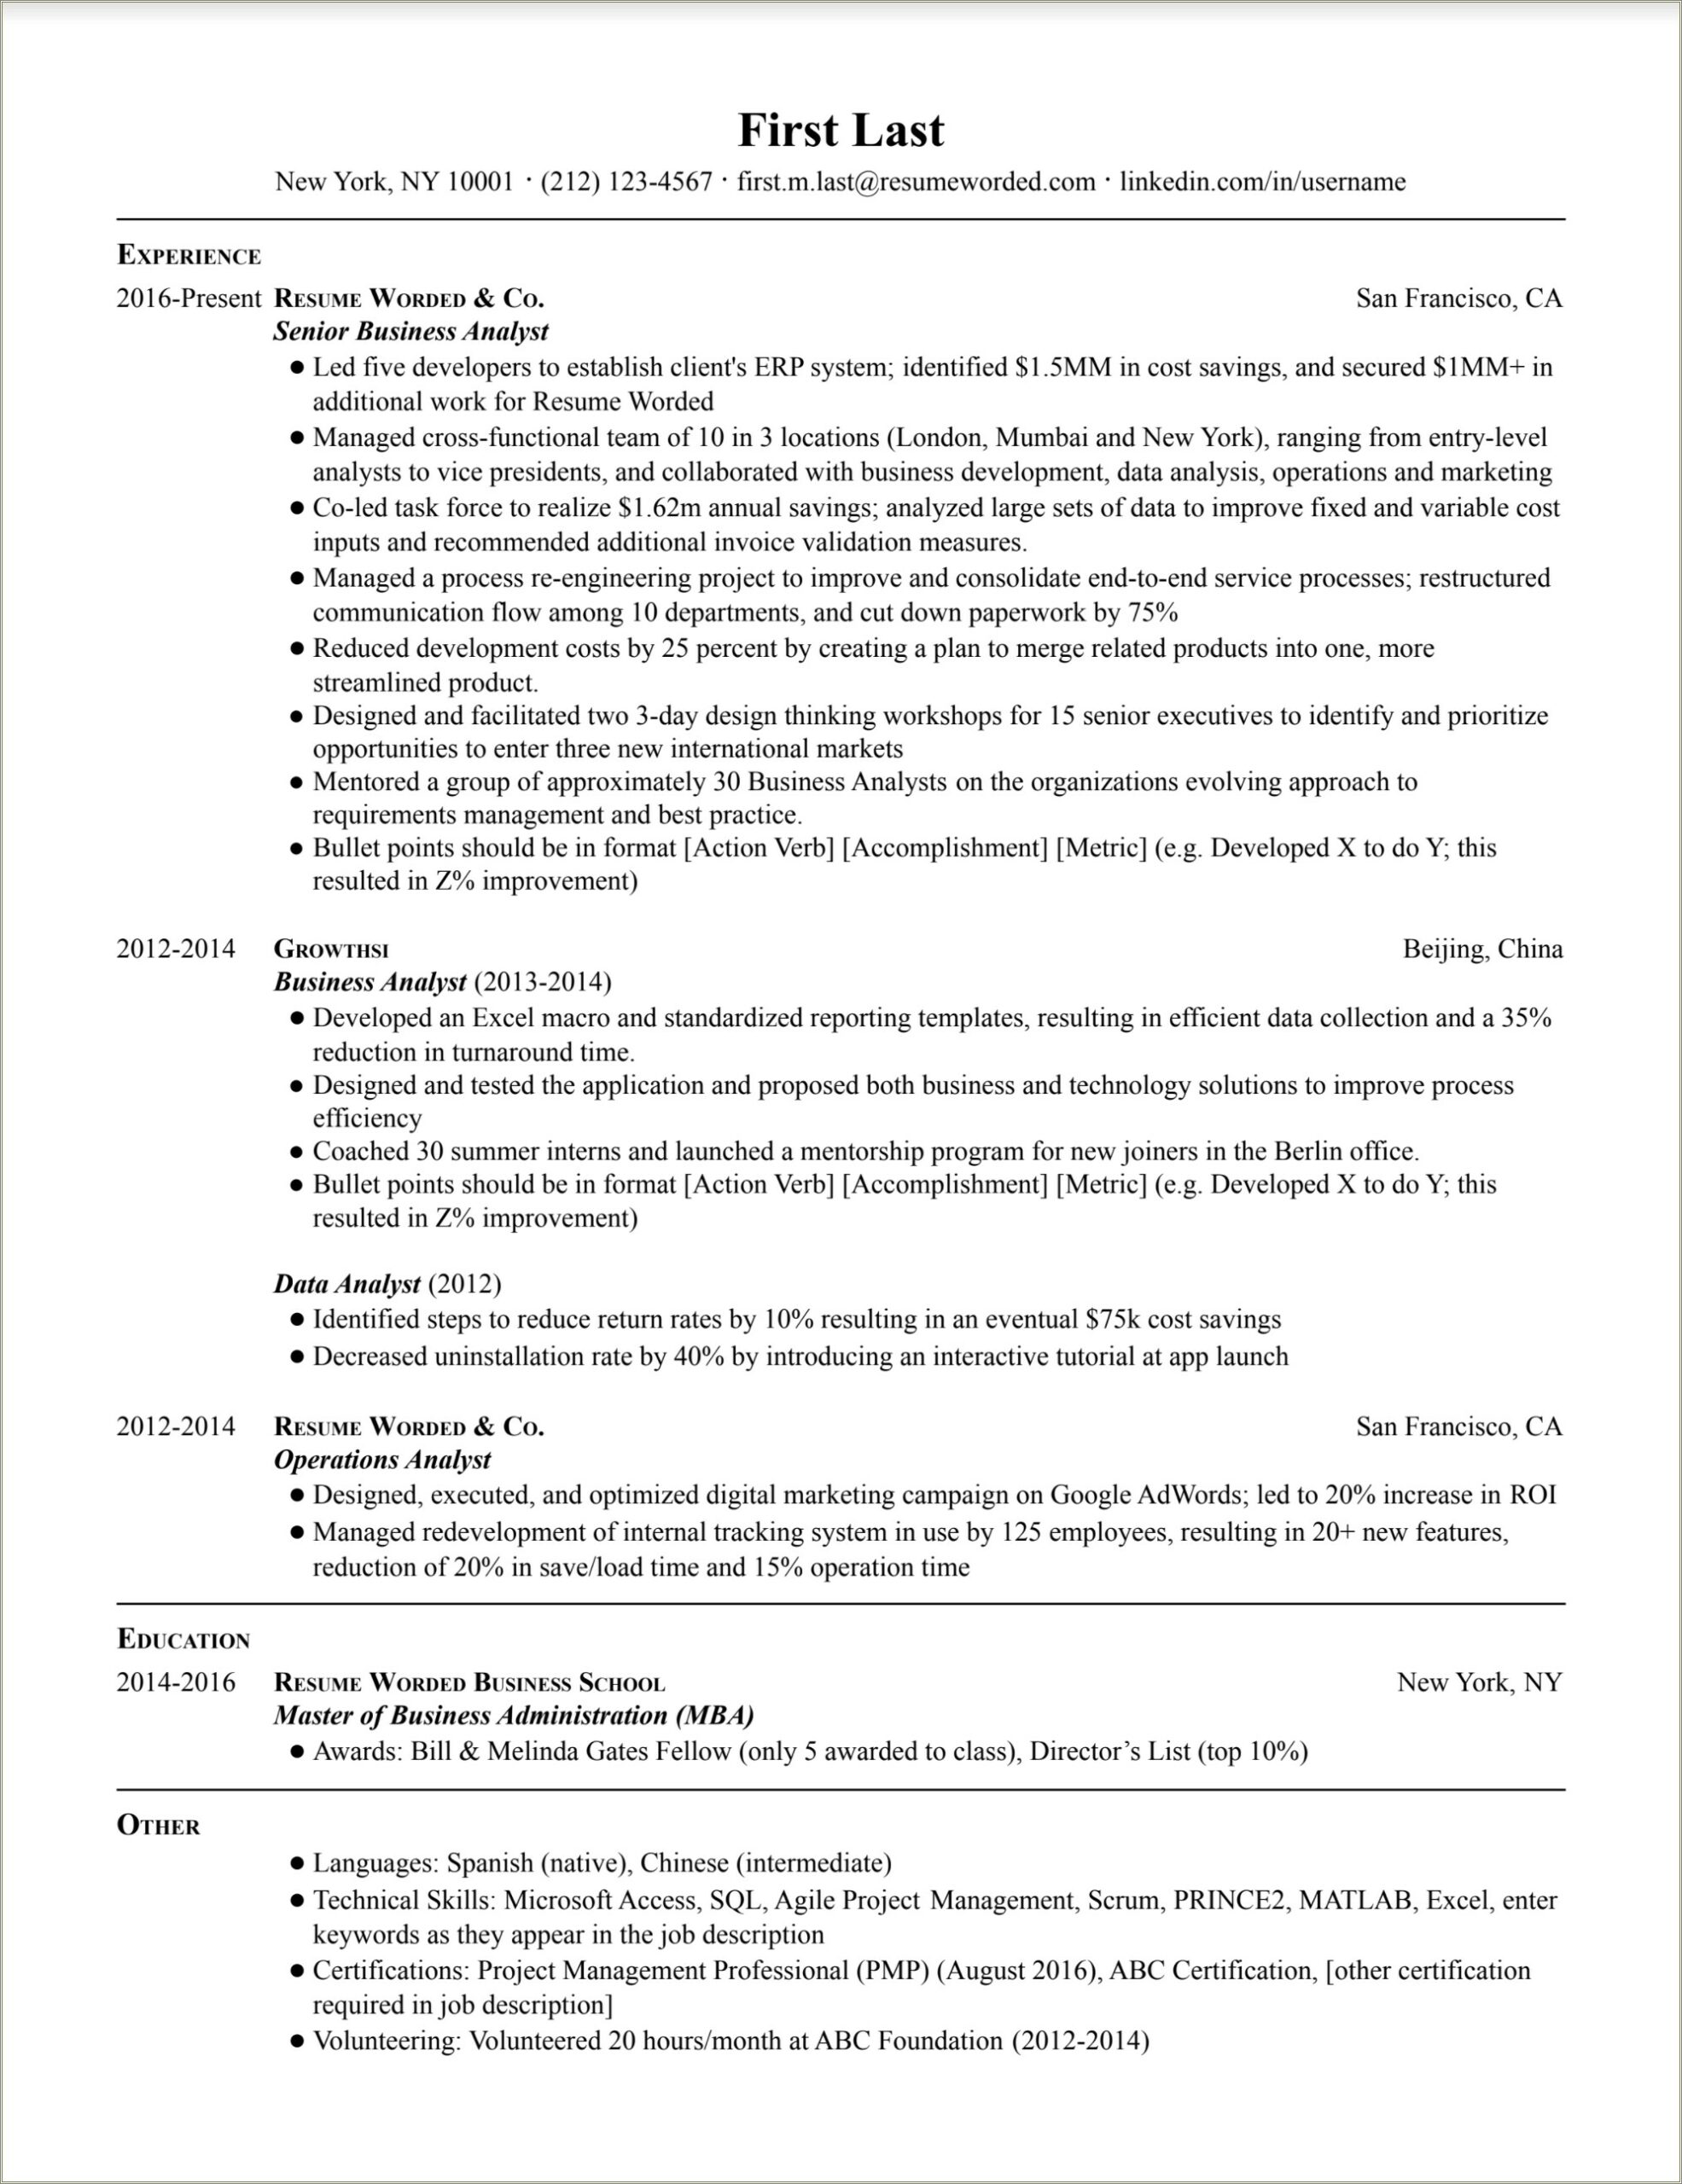 Apply To Google Jobs Different Resumes